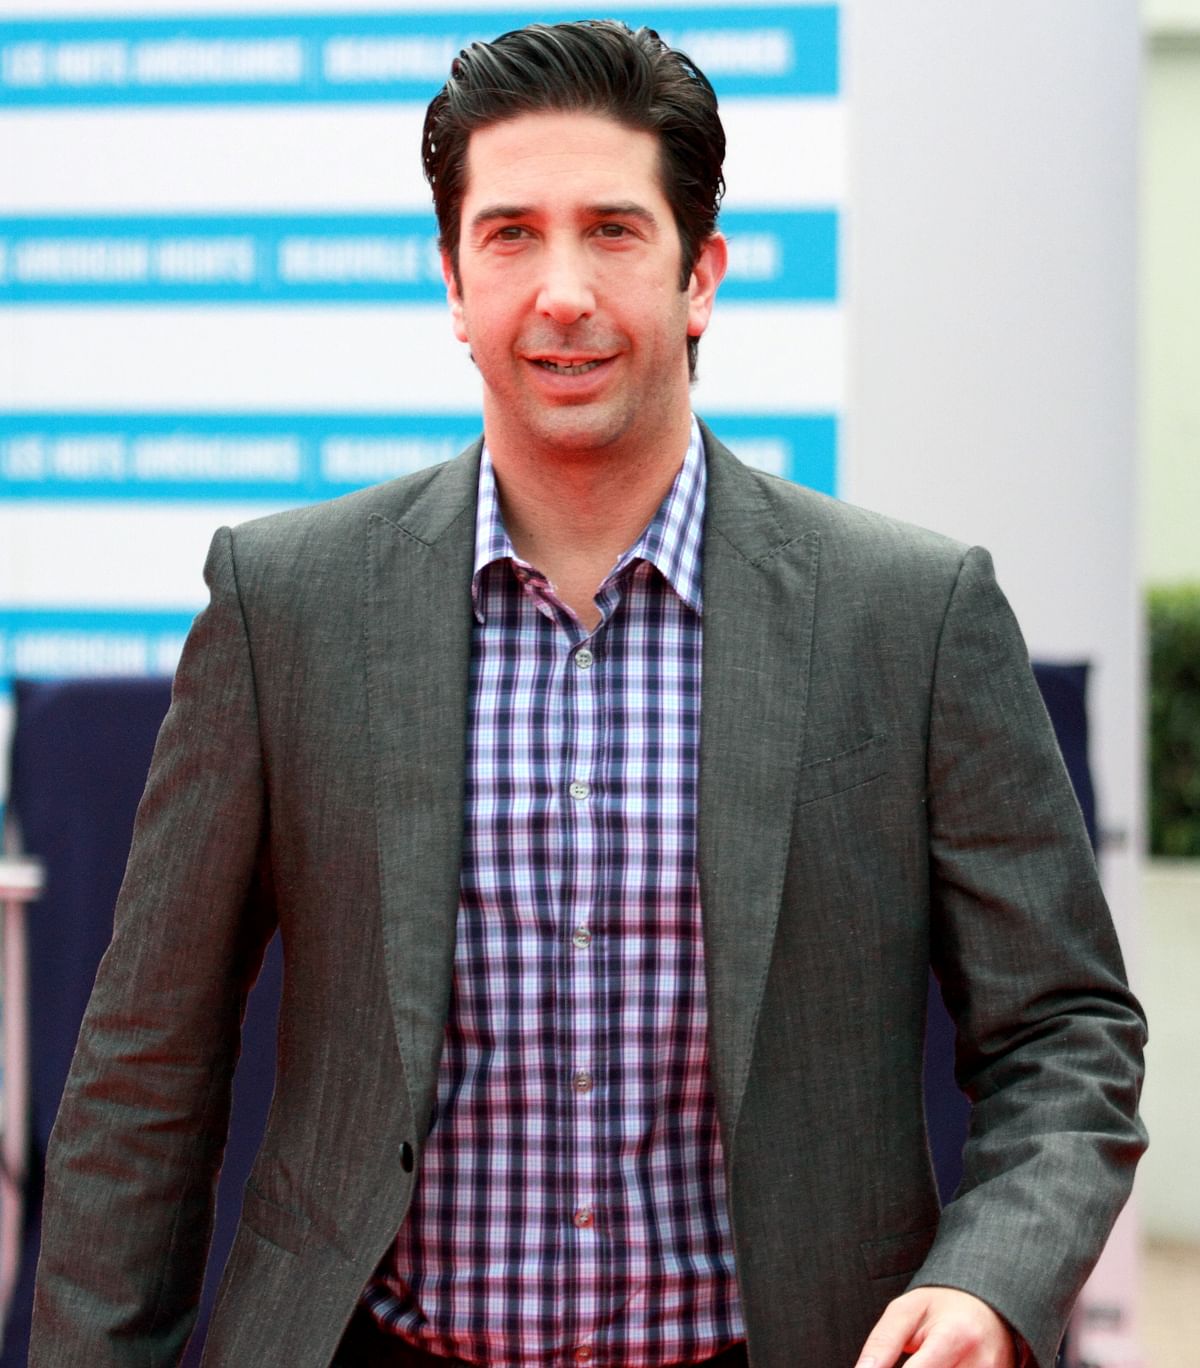 You share your birthday with the likes of Shah Rukh Khan and David Schwimmer aka Ross Geller!